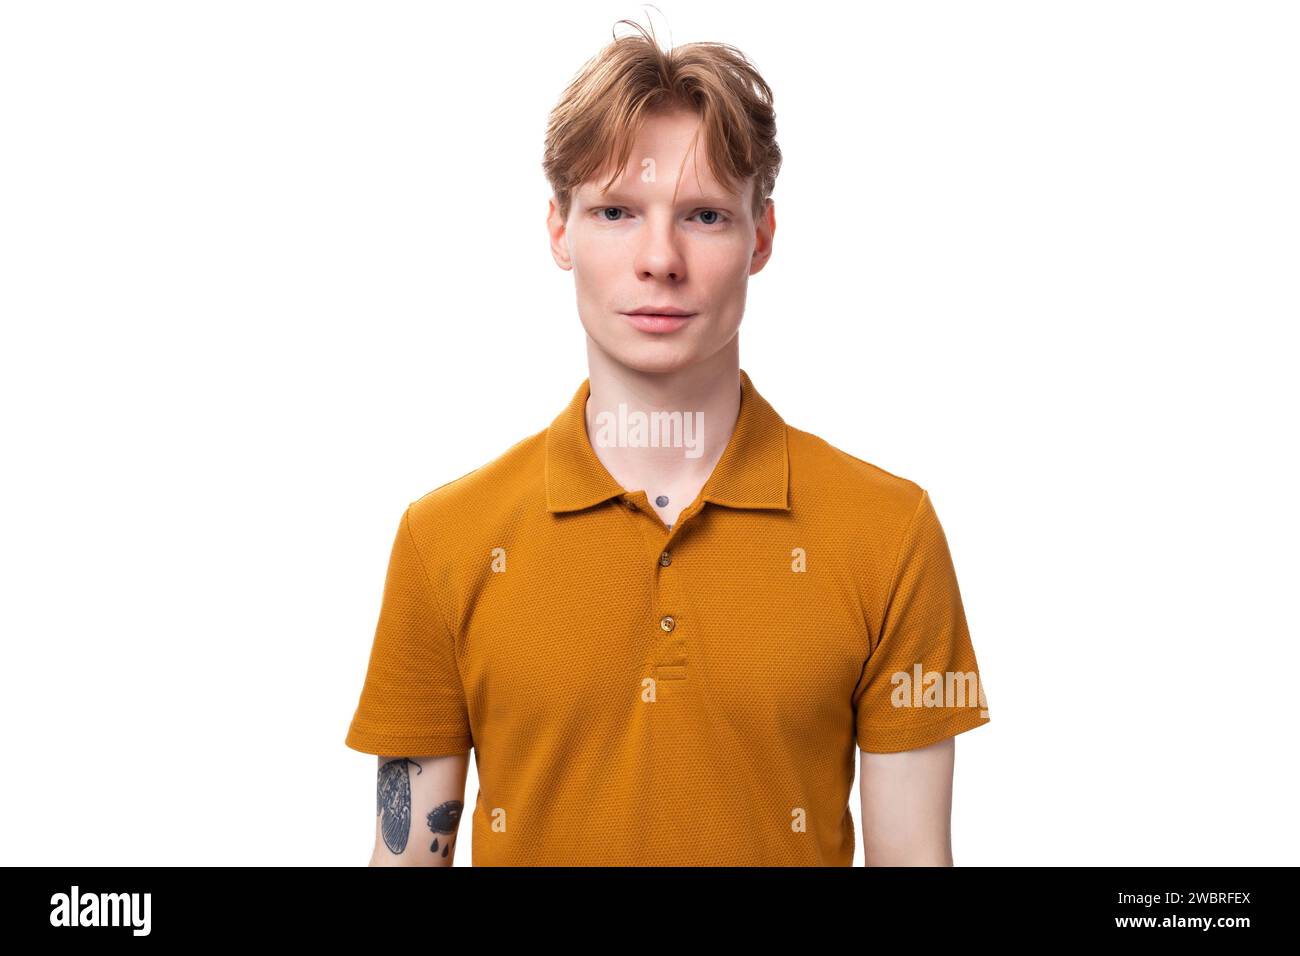 young serious guy with short red hair dressed in a summer orange t-shirt Stock Photo